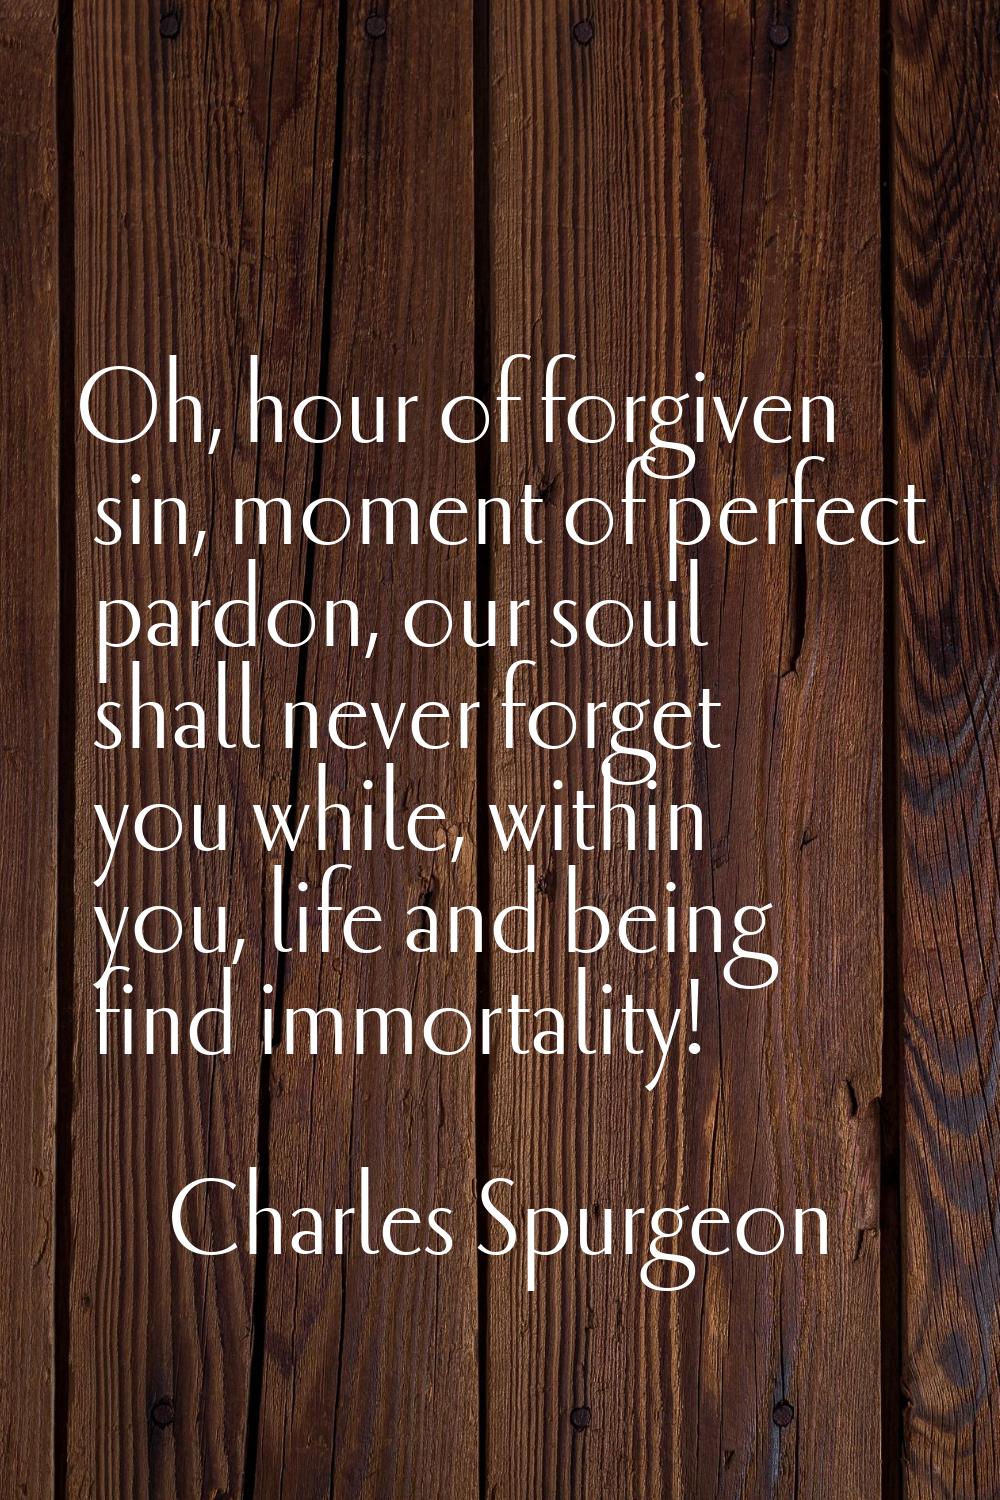 Oh, hour of forgiven sin, moment of perfect pardon, our soul shall never forget you while, within y